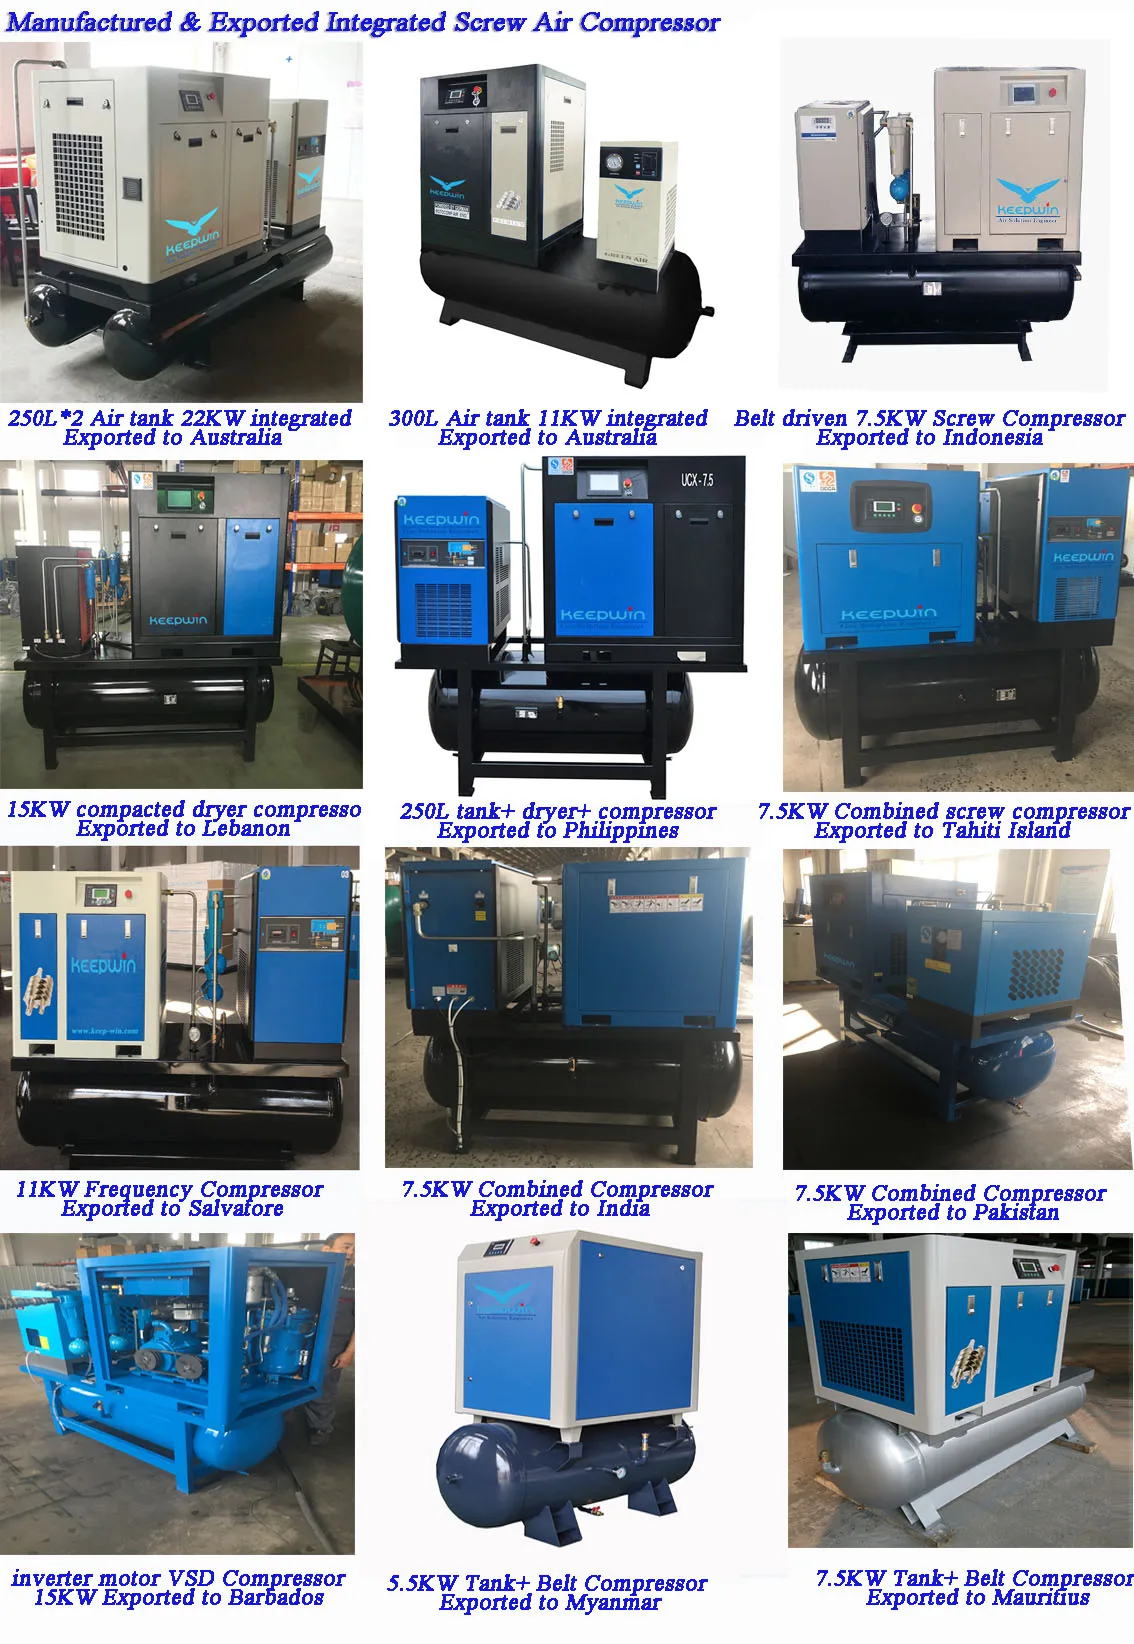 11KW Integrated Screw Compressor with 2.4m3/min 13bar 10bar Air Dryer without air tank